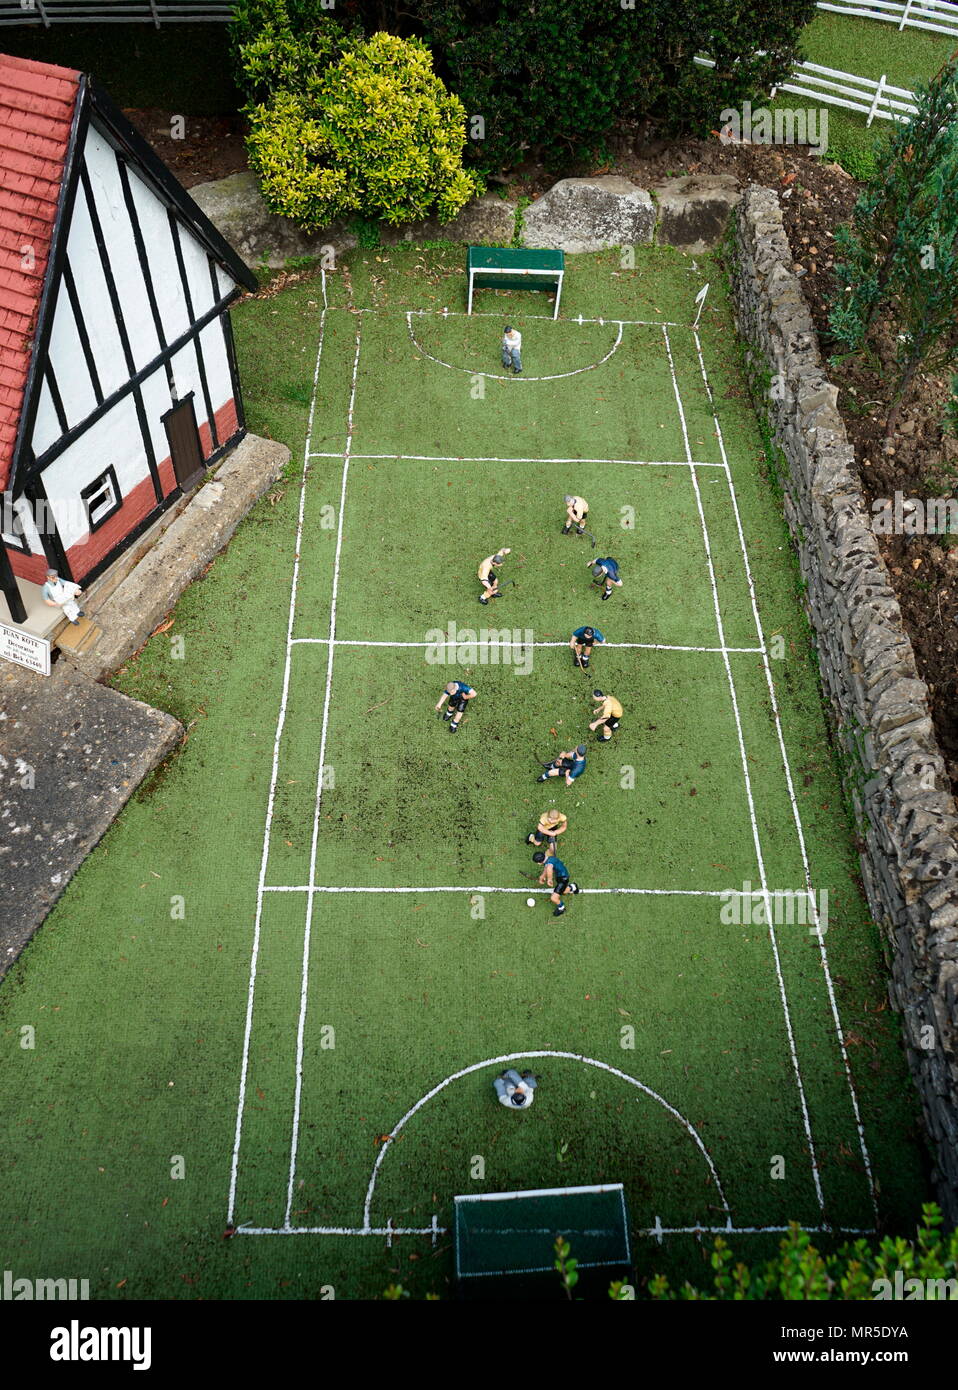 School Hockey match, in the model village at Bekonscot, Buckinghamshire, England, the oldest  model village in the world. Stock Photo